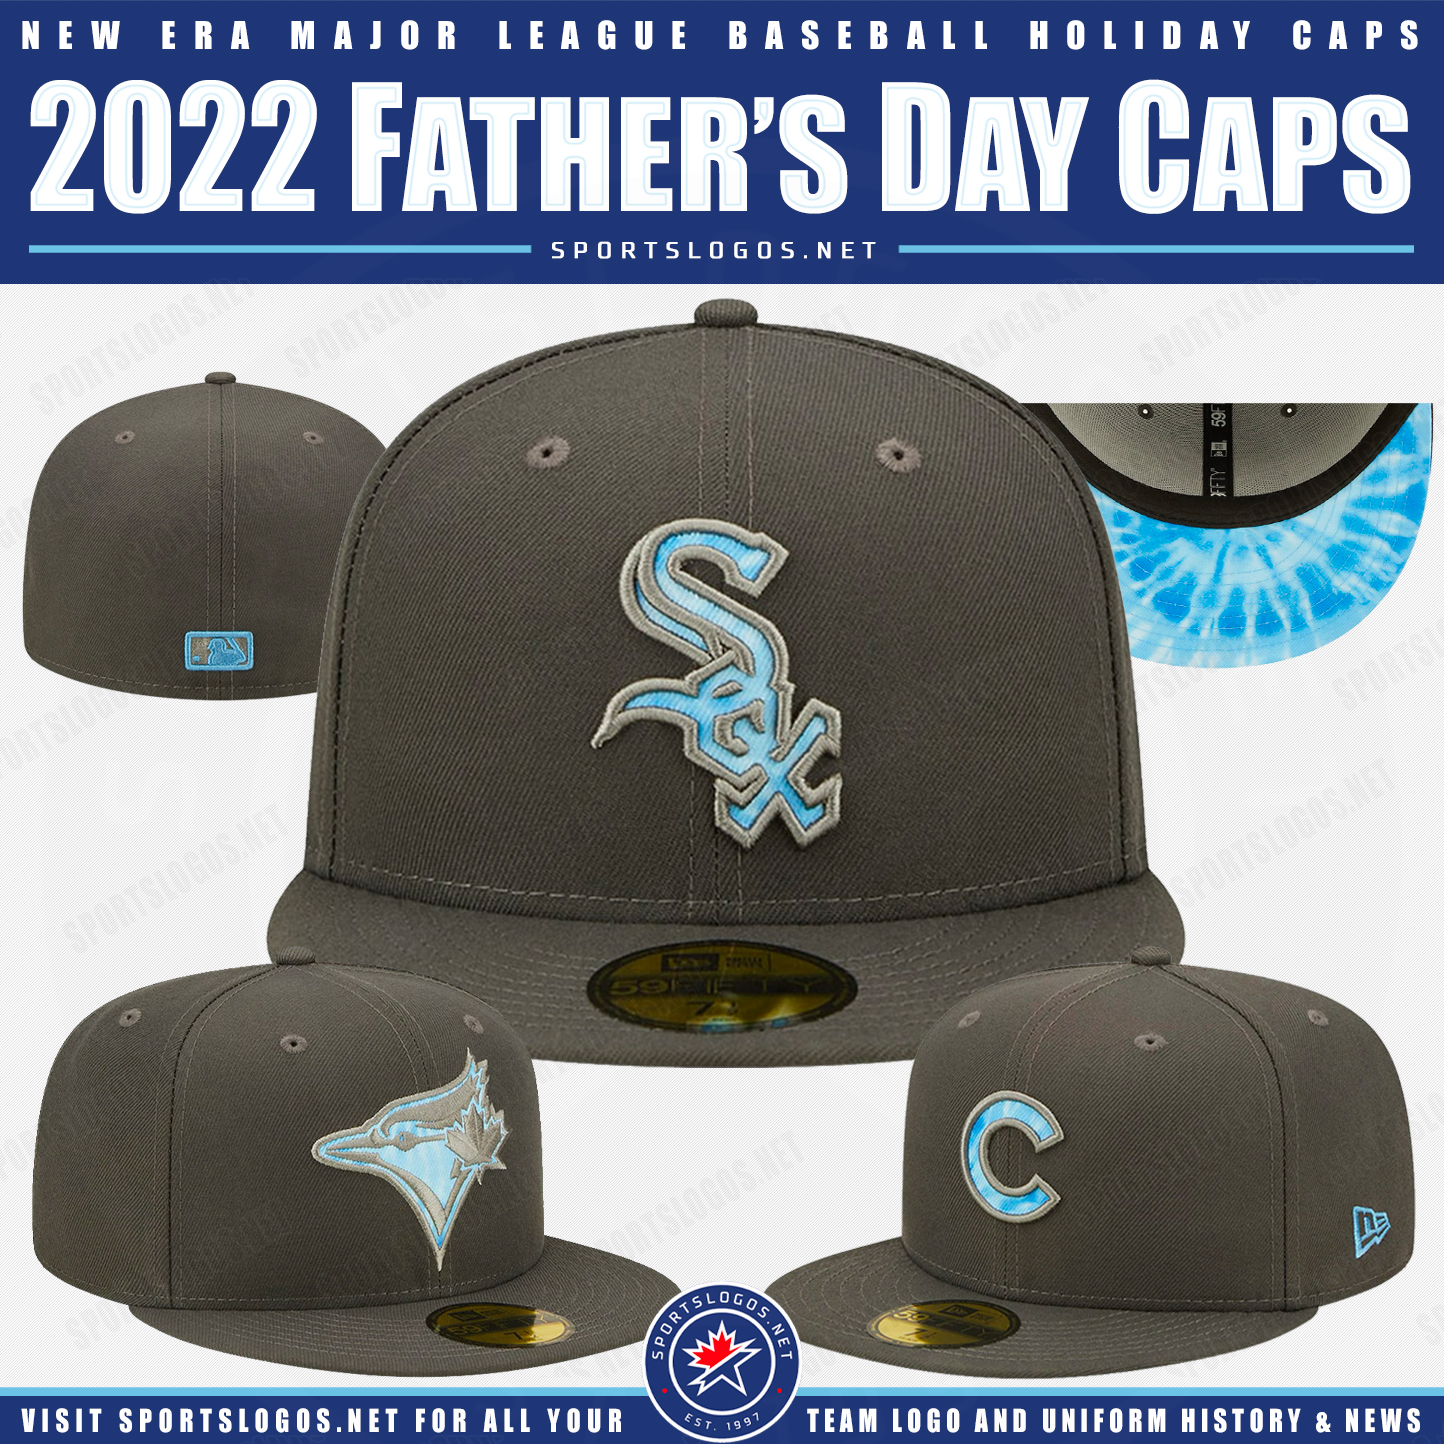 mlb father's day uniforms 2022